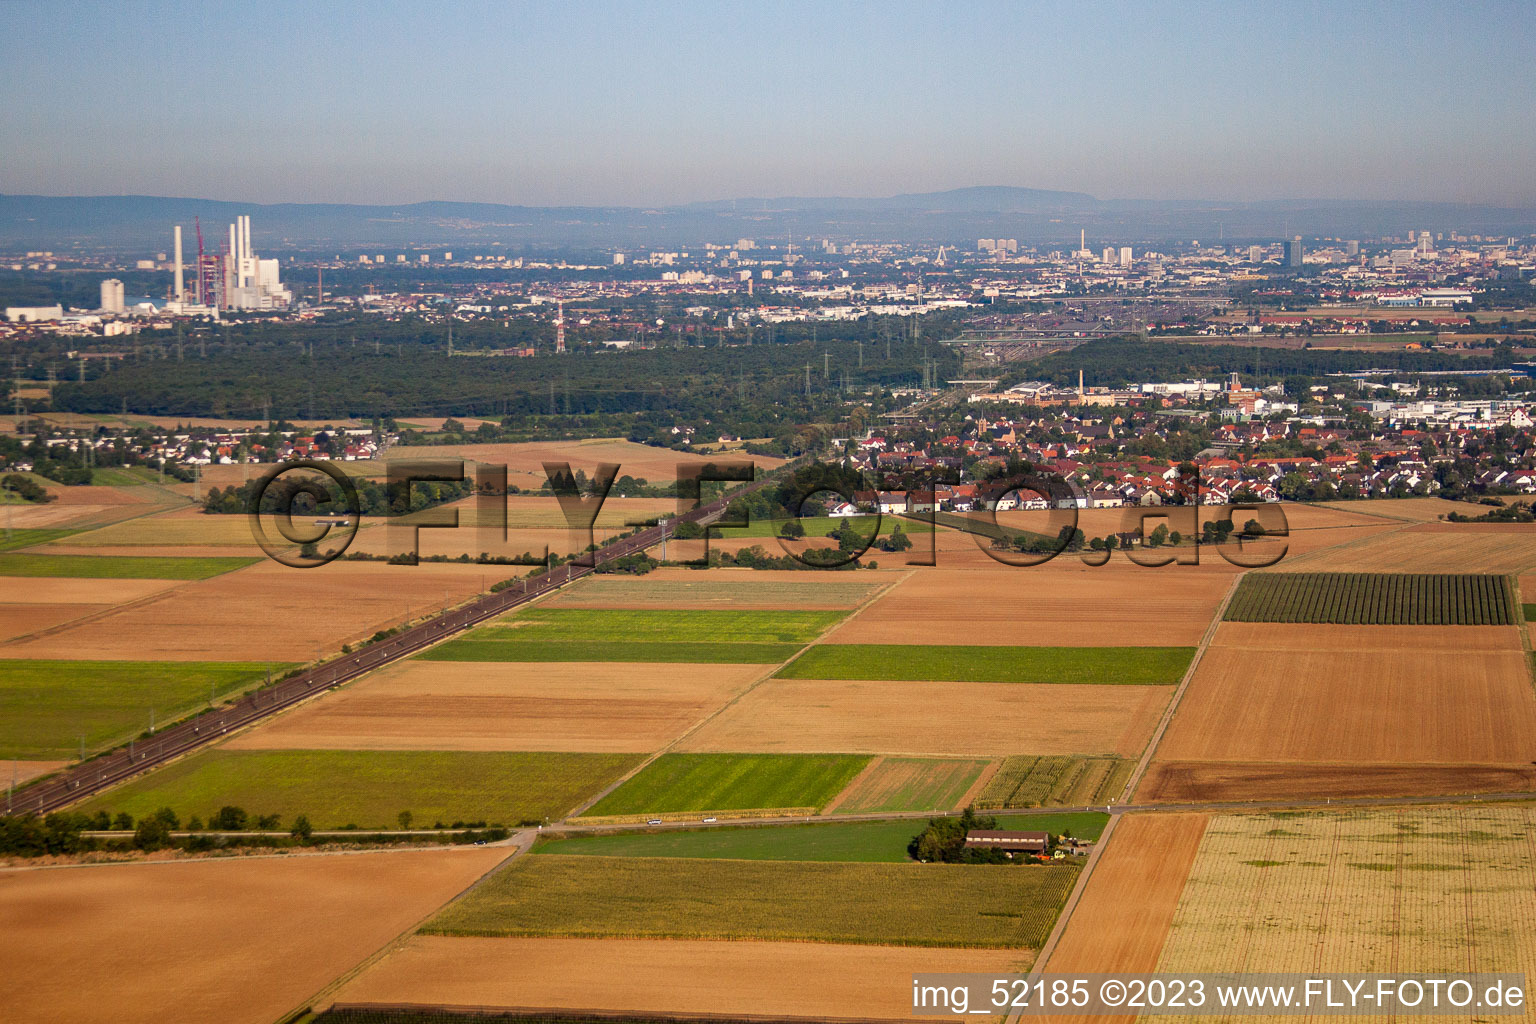 Drone image of District Friedrichsfeld in Mannheim in the state Baden-Wuerttemberg, Germany